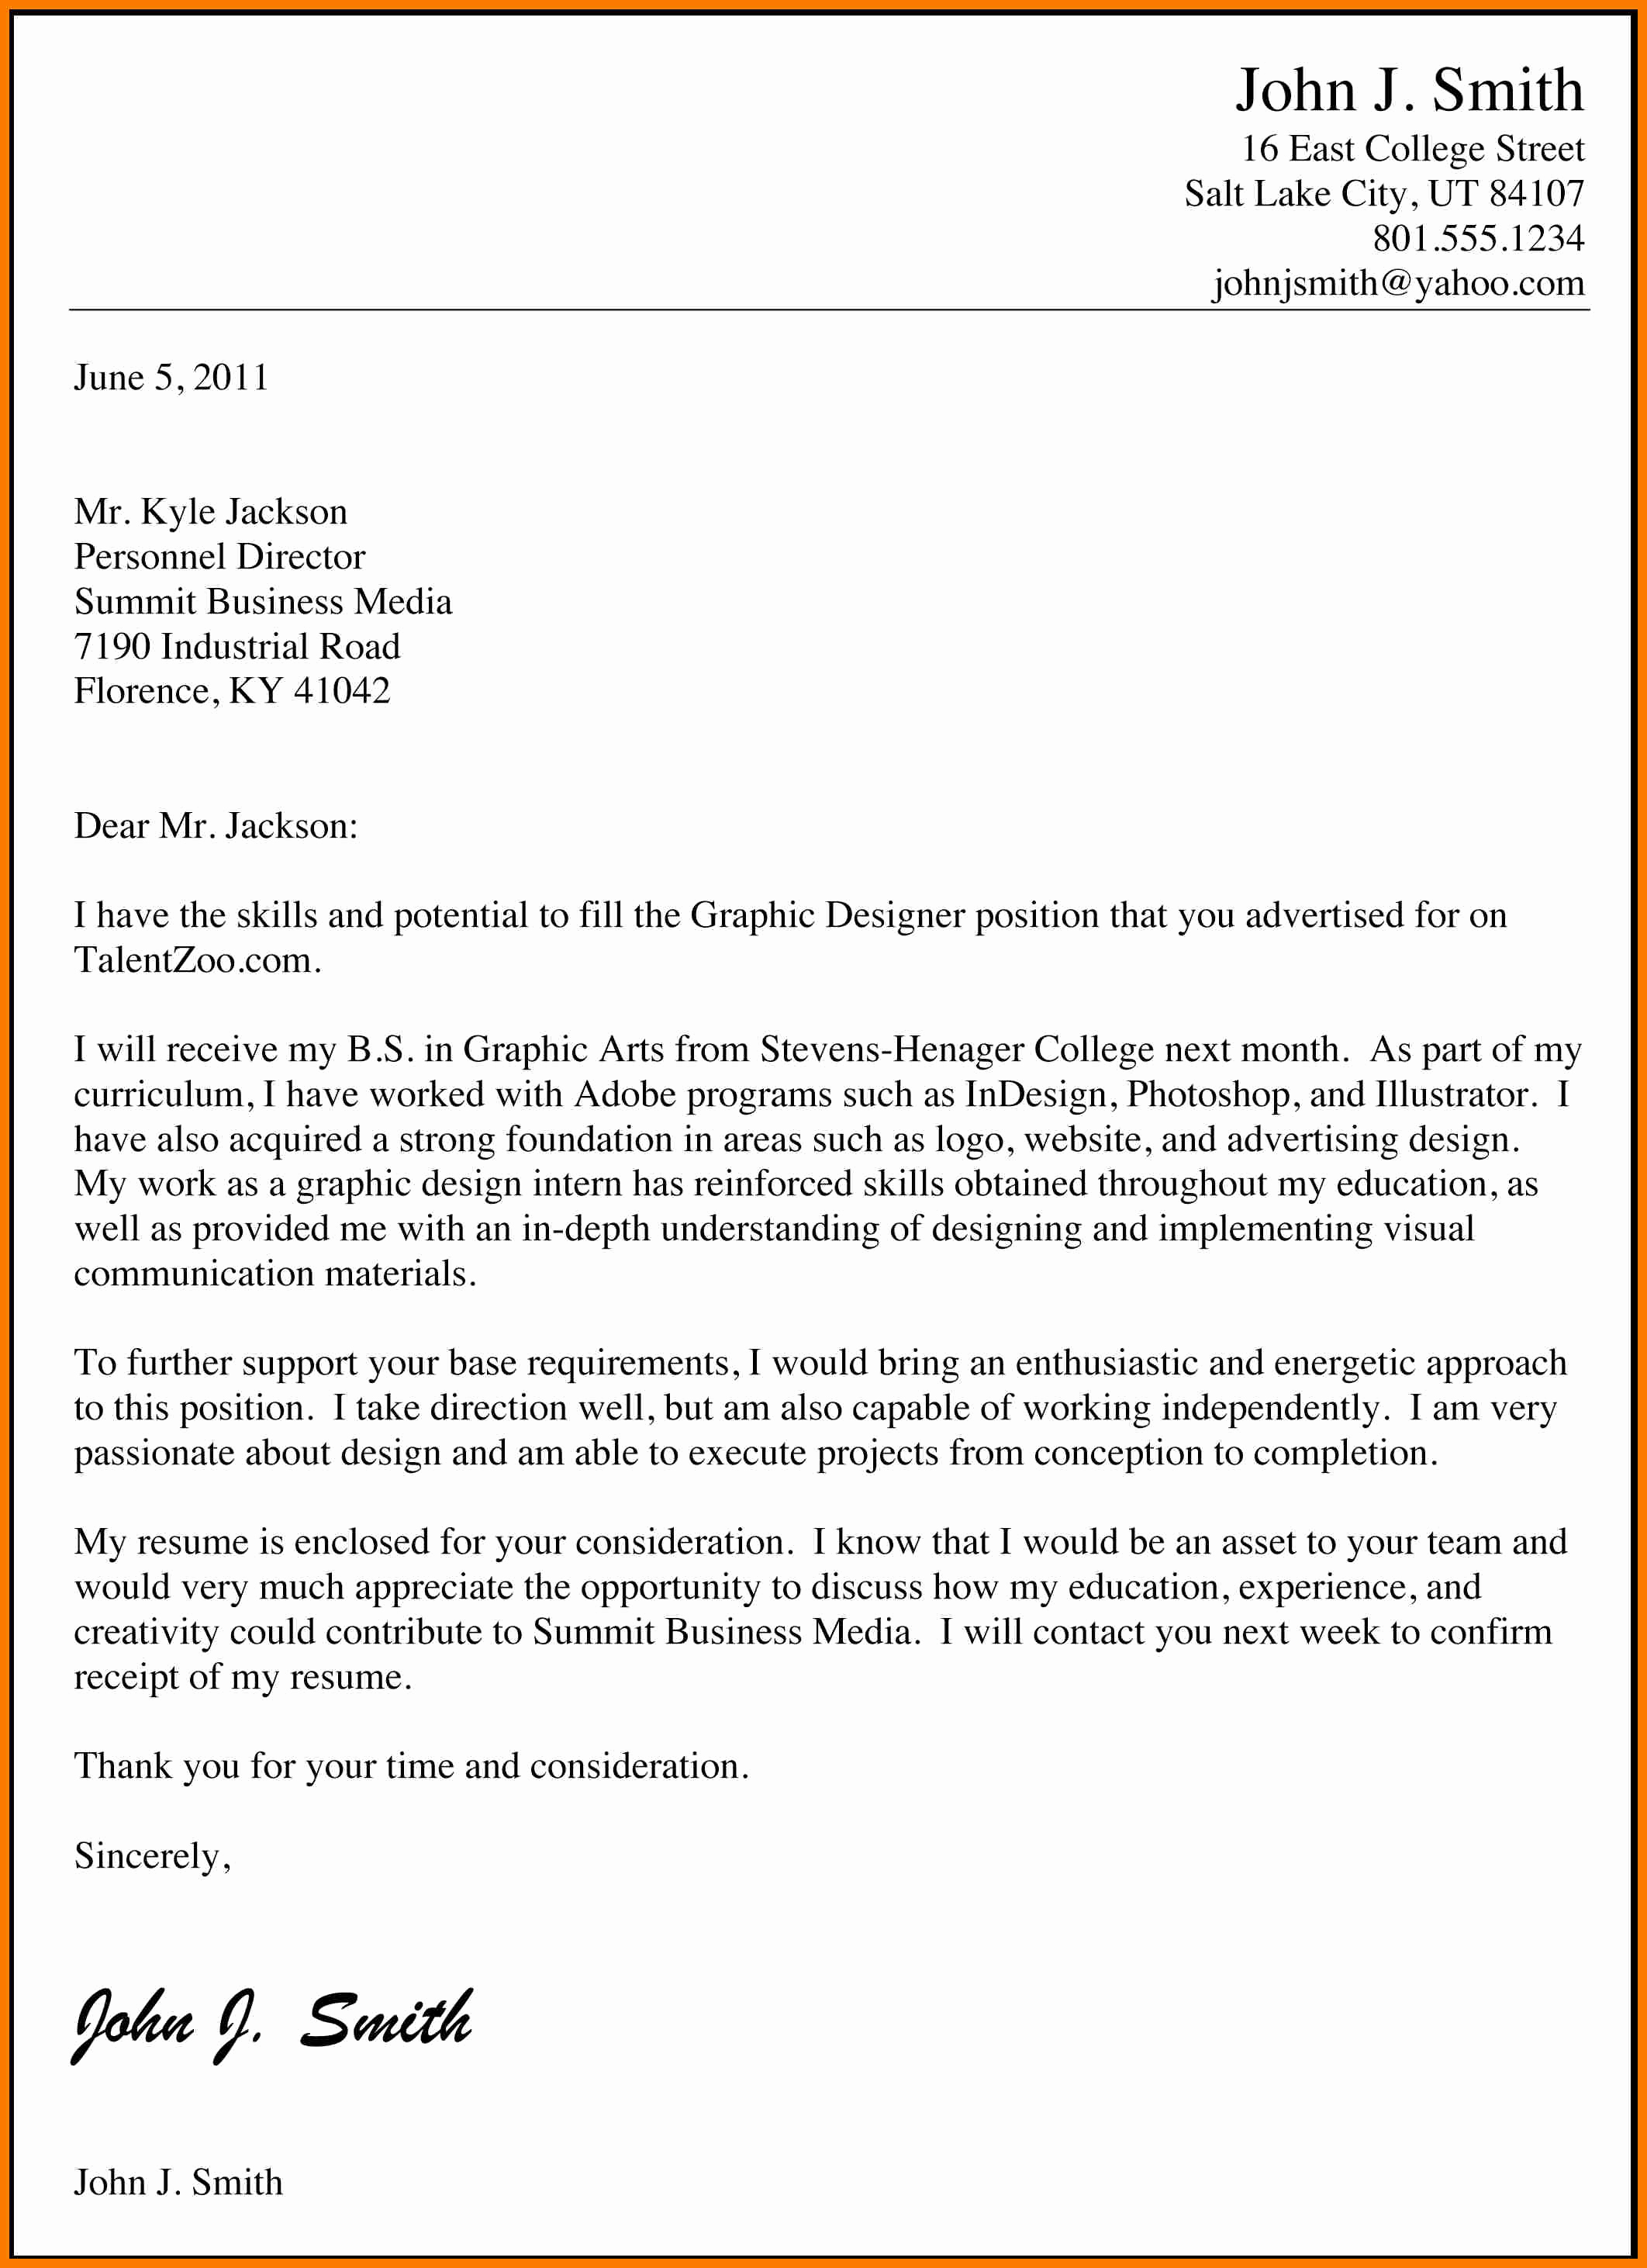 Letters Of Application Example Awesome 9 Ficial Job Application Letter Examples Pdf